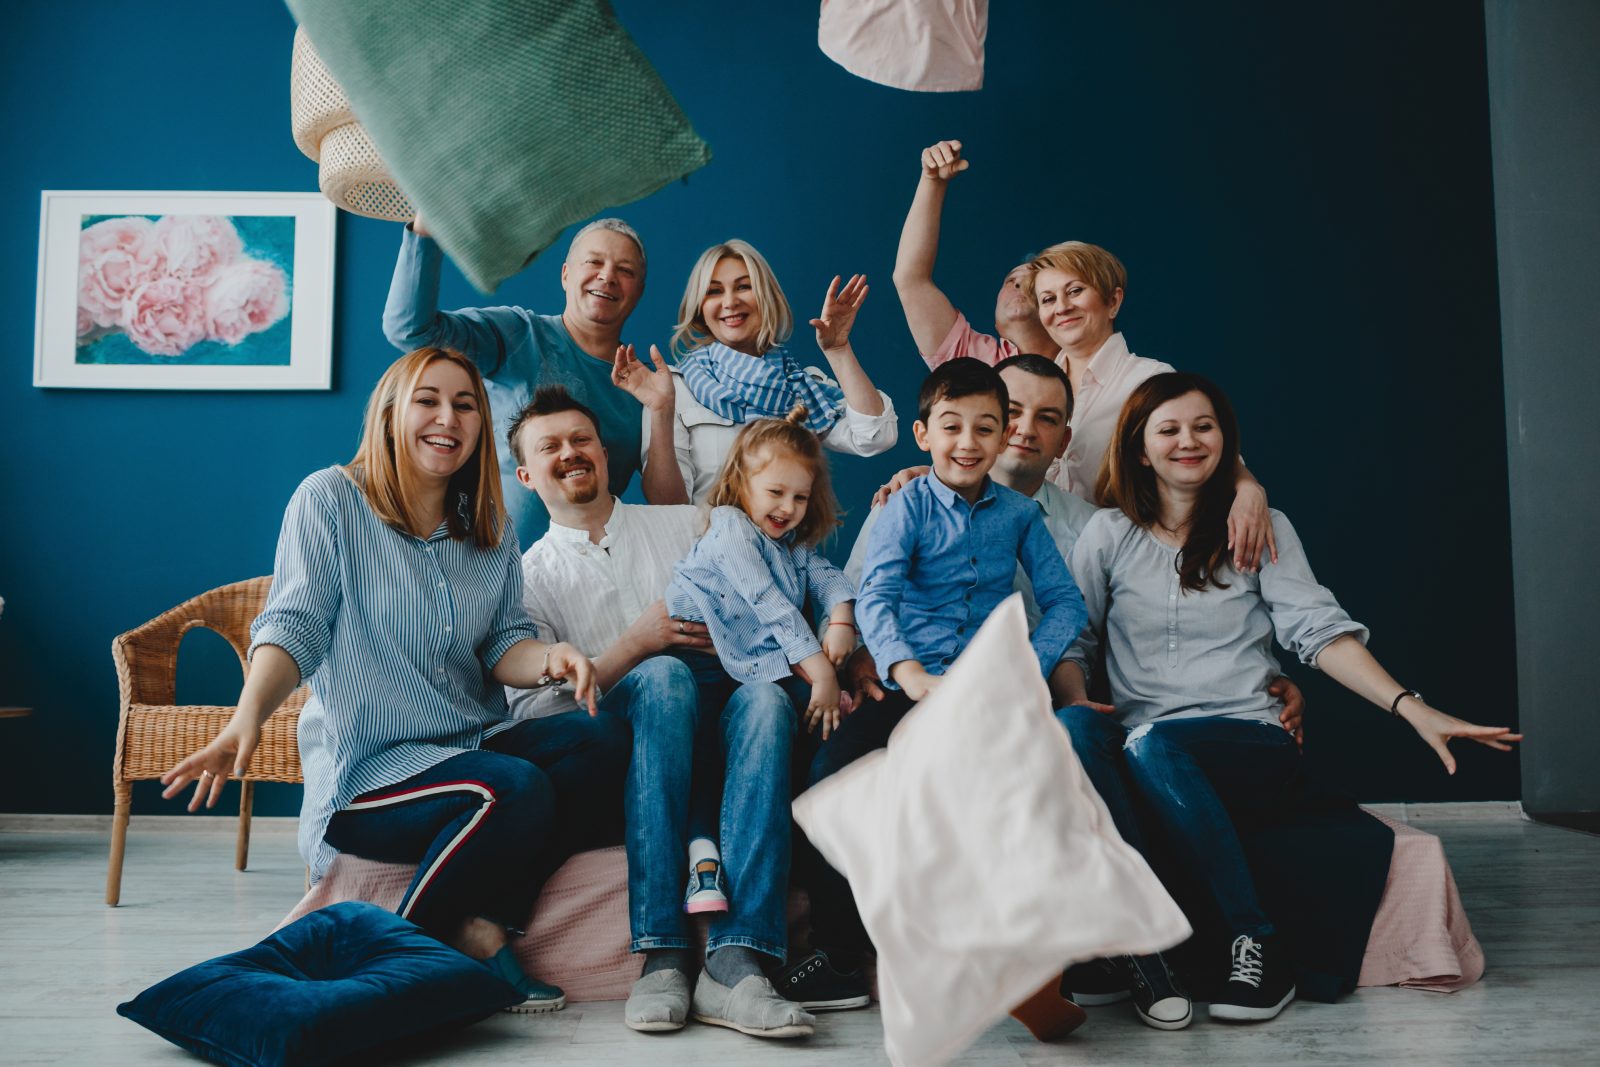 Grandparents, parents and their little children sit together on the bed in a blue room and fight pillows